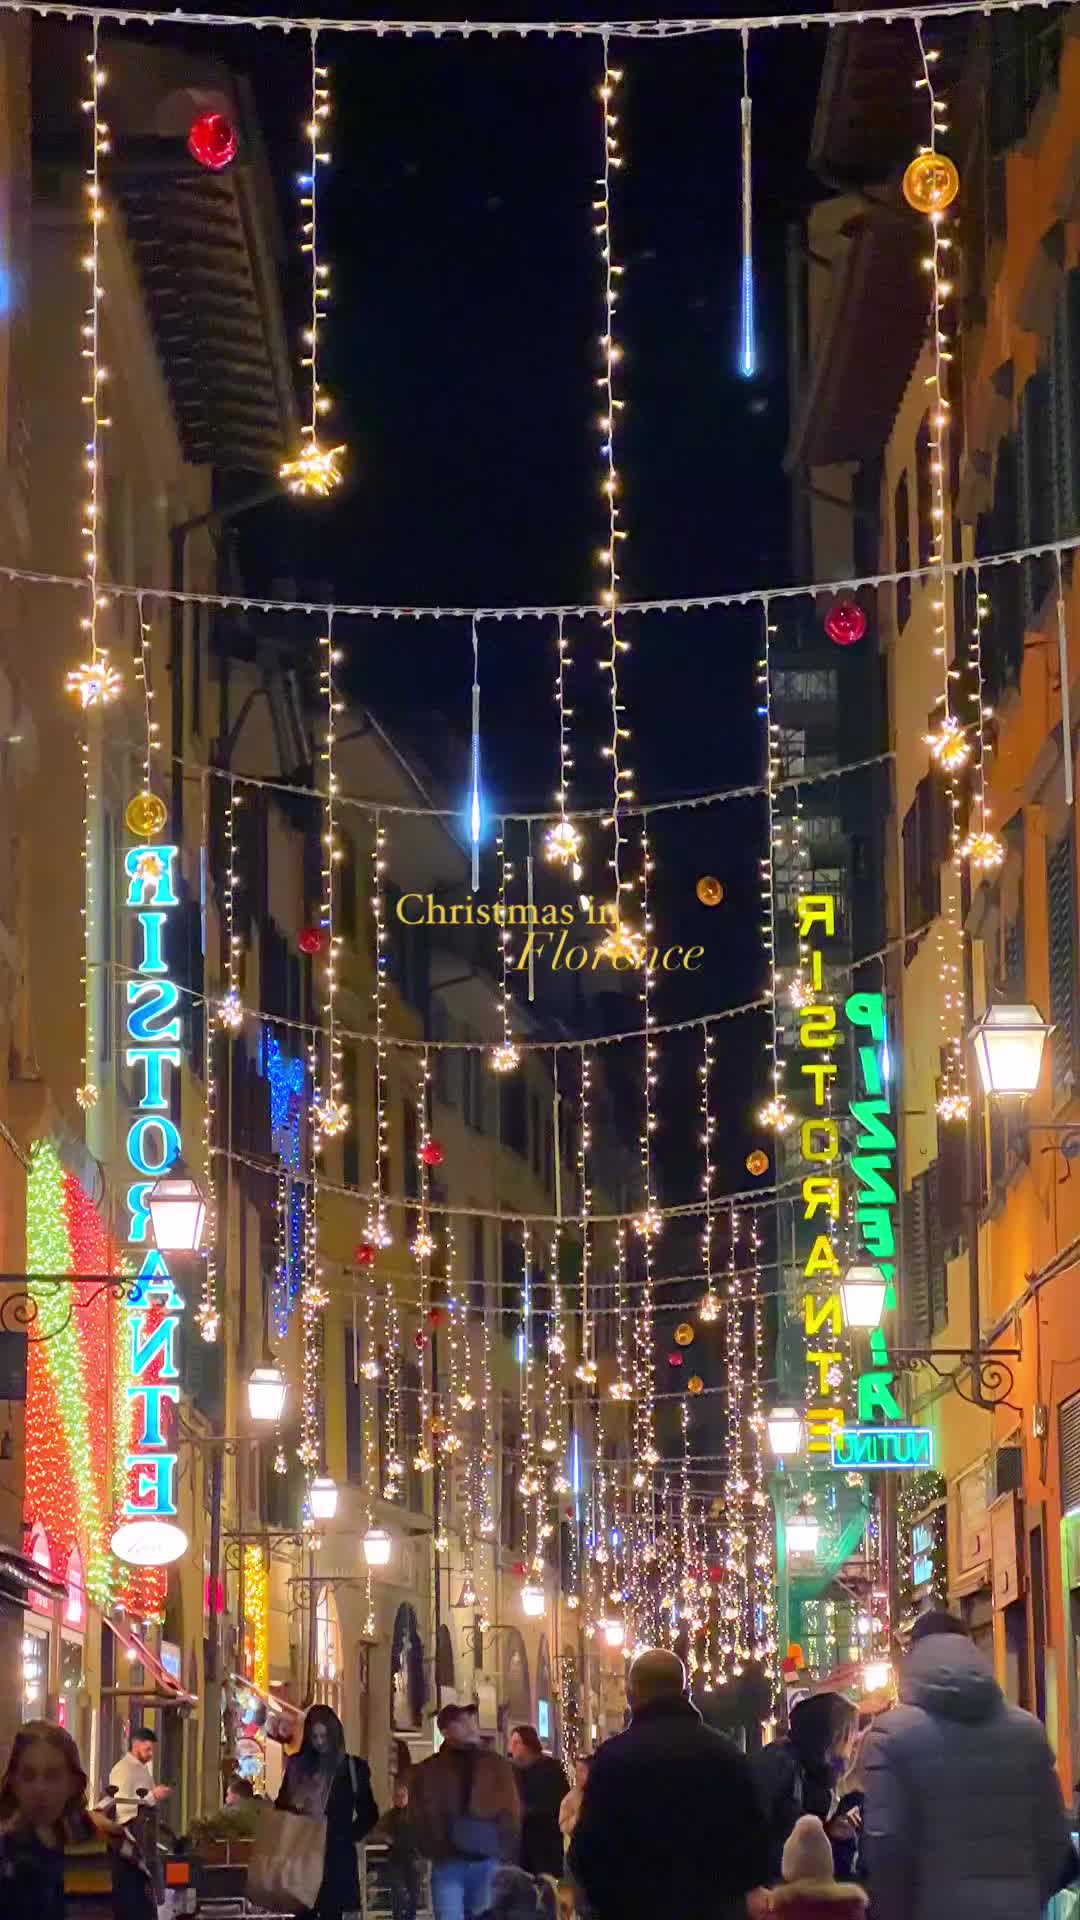 Christmas Festivities in Florence: 13 Days to Go! 🎄🎅✨